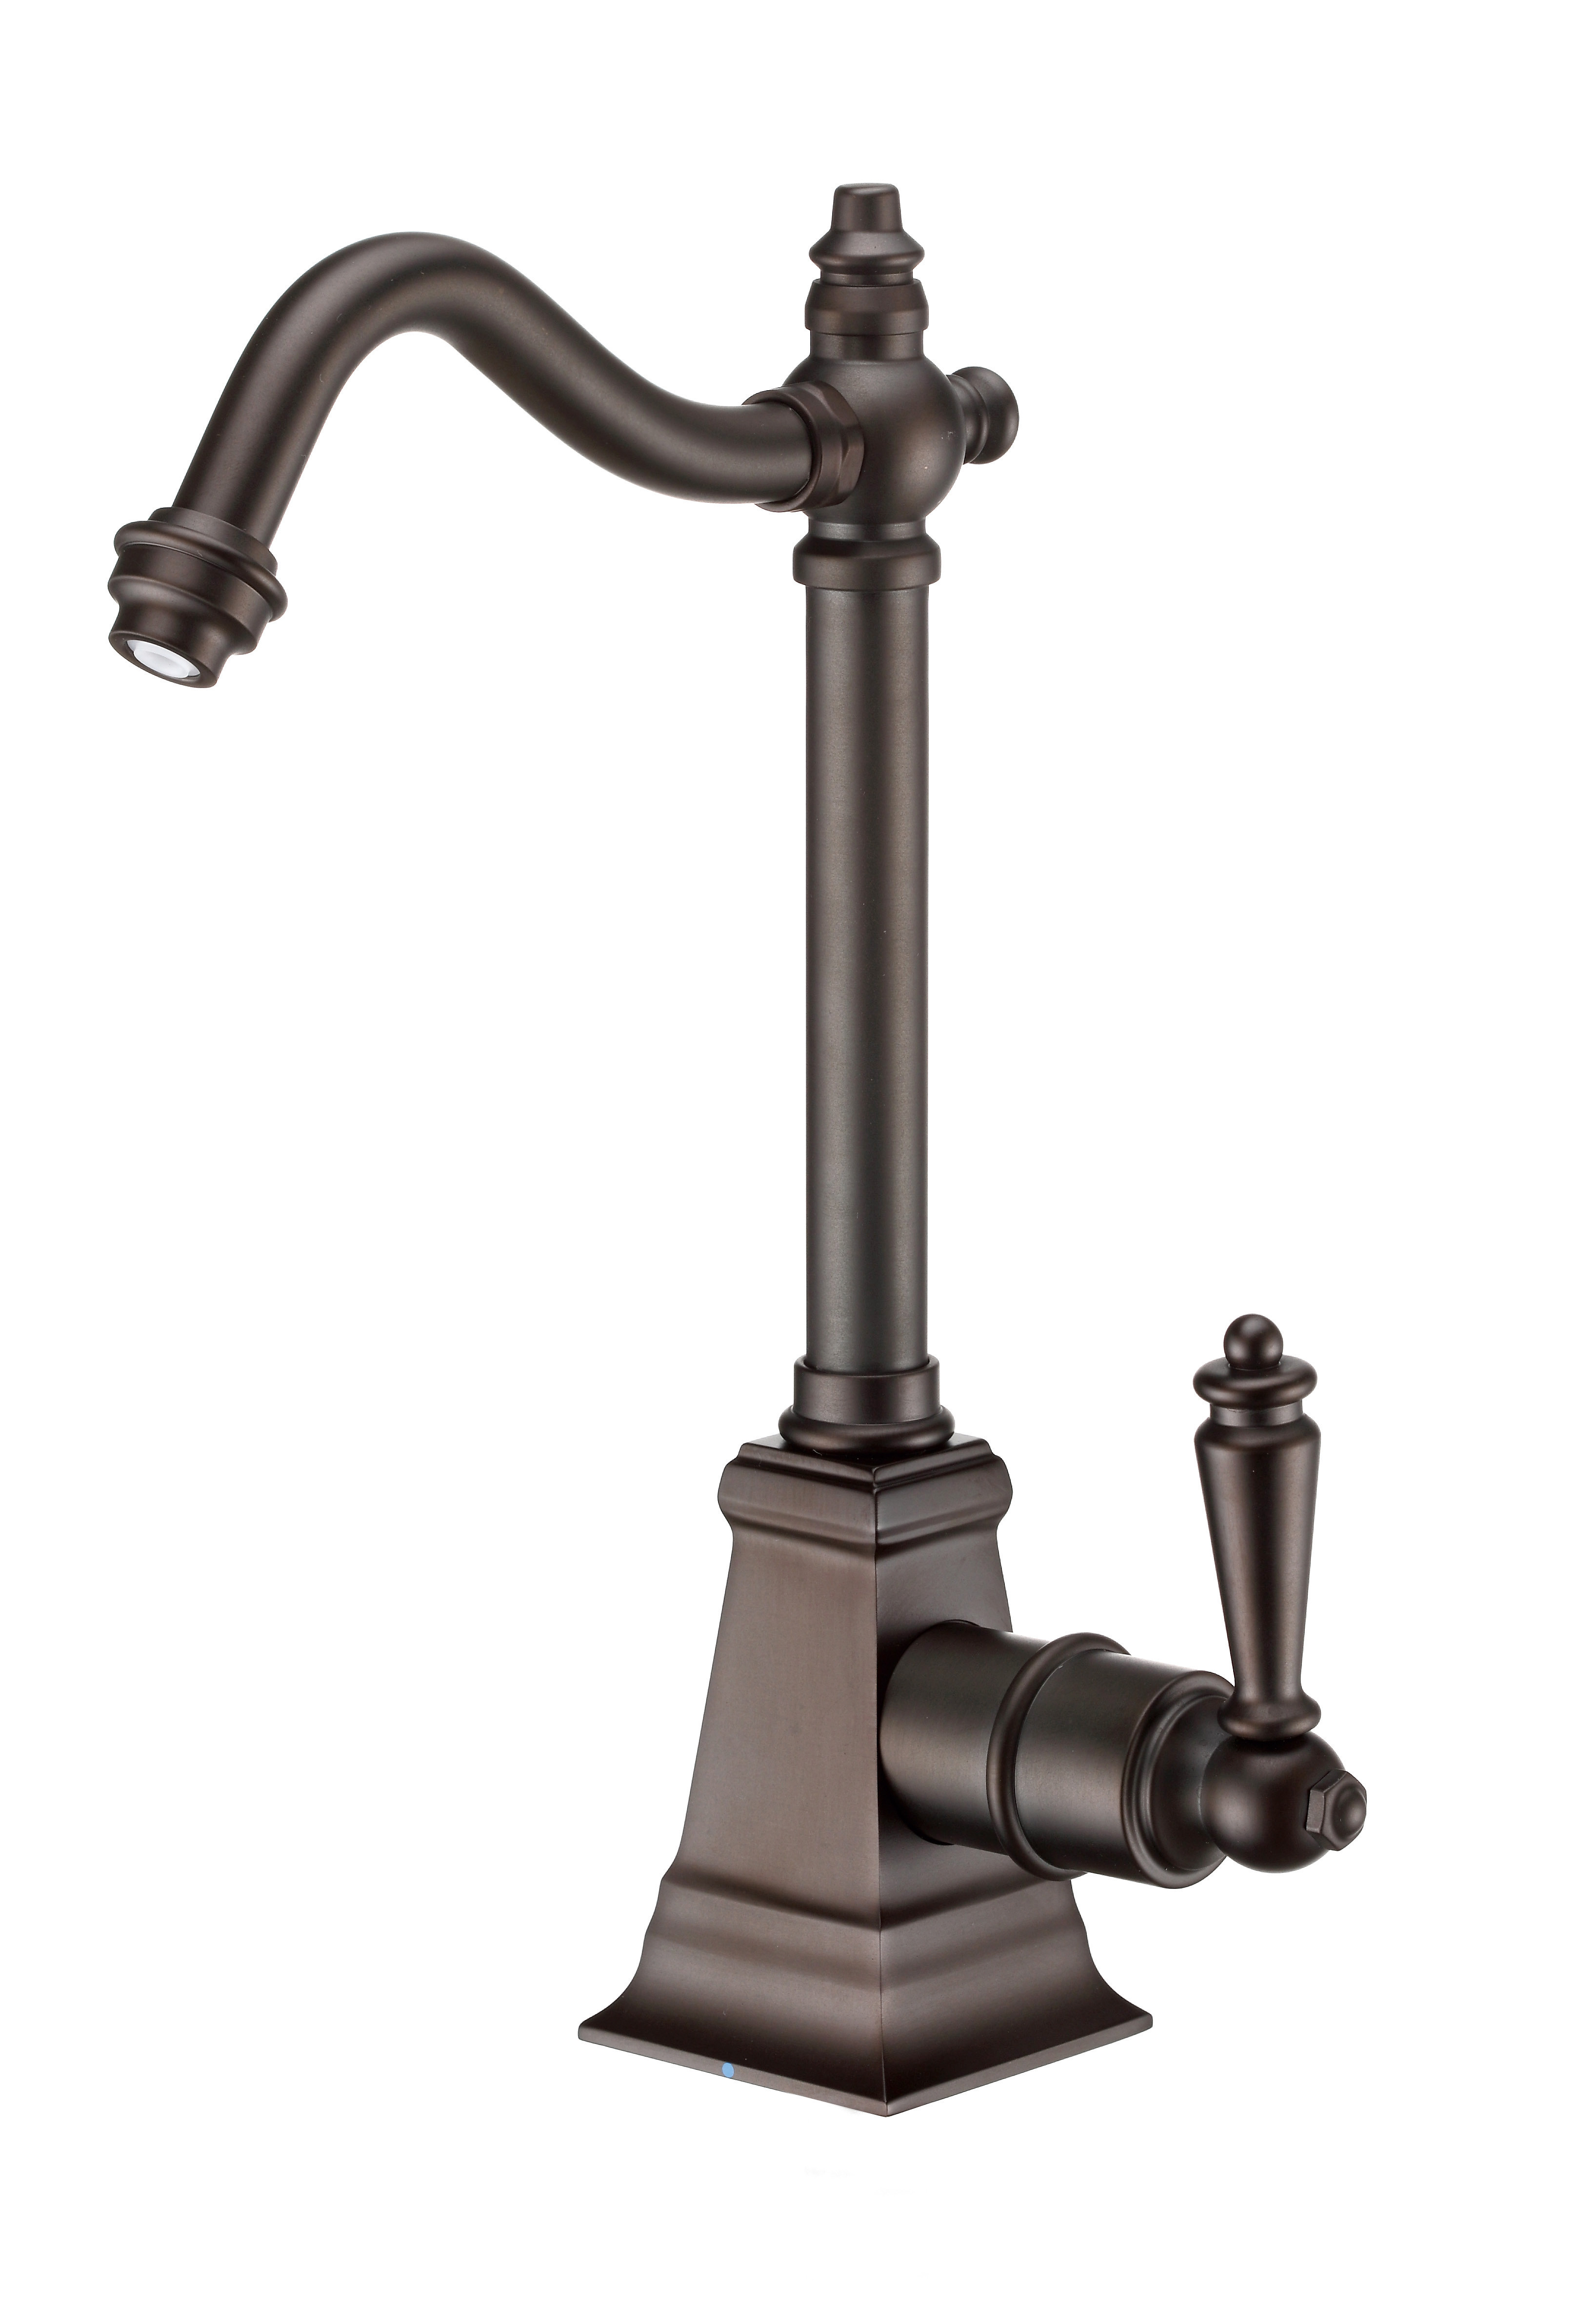 Whitehaus WHFH-C2011-ORB Oil Rubbed Bronze Point of Use Cold Water Faucet with Traditional Spout